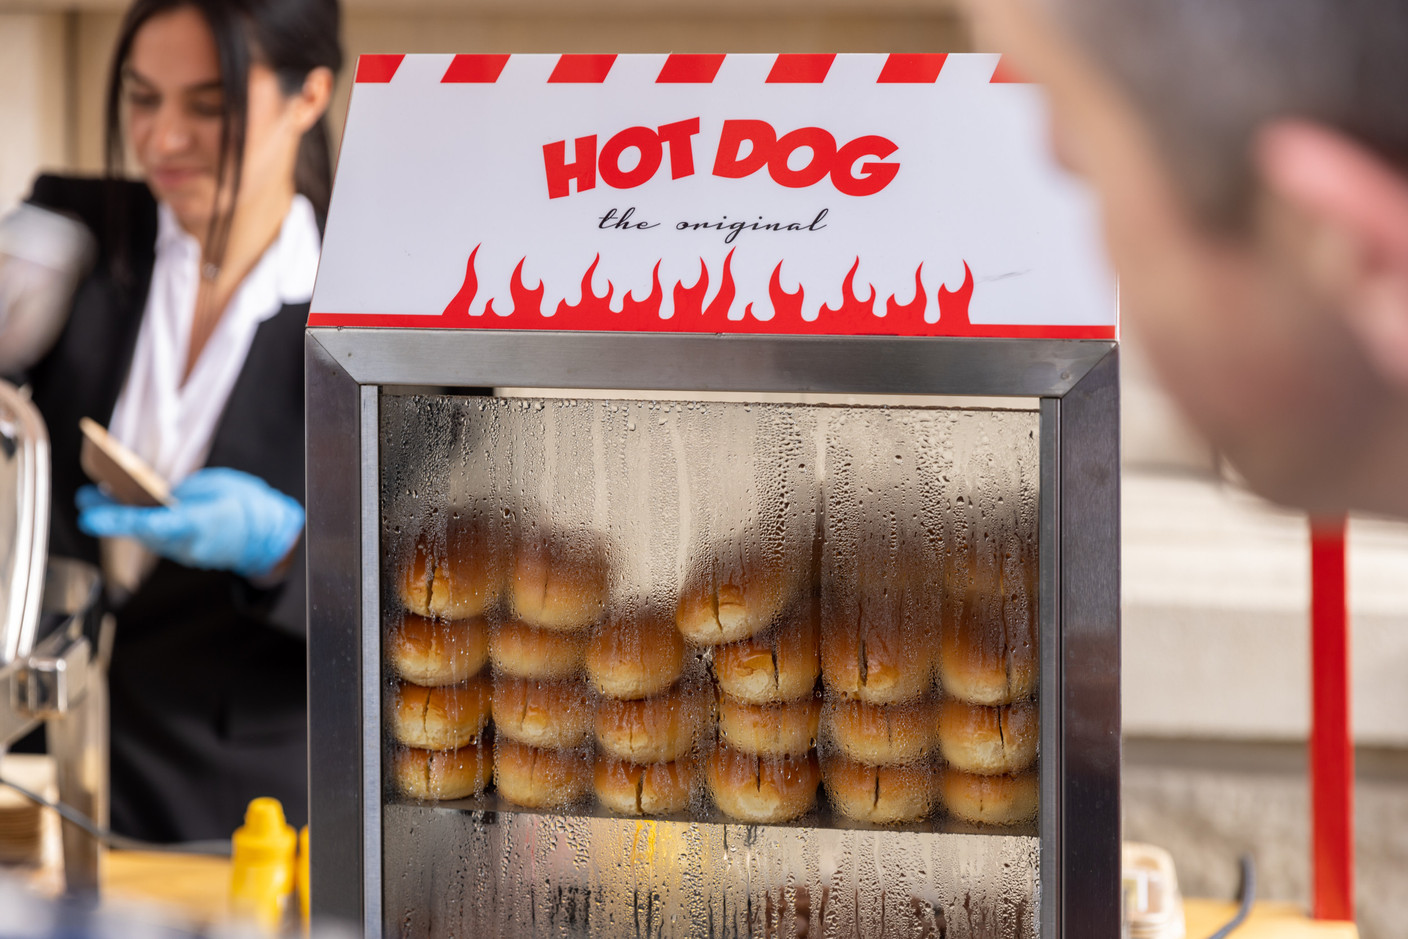 Fresh hot dogs were among the food guests got to sample. Photo: Romain Gamba/Maison Moderne